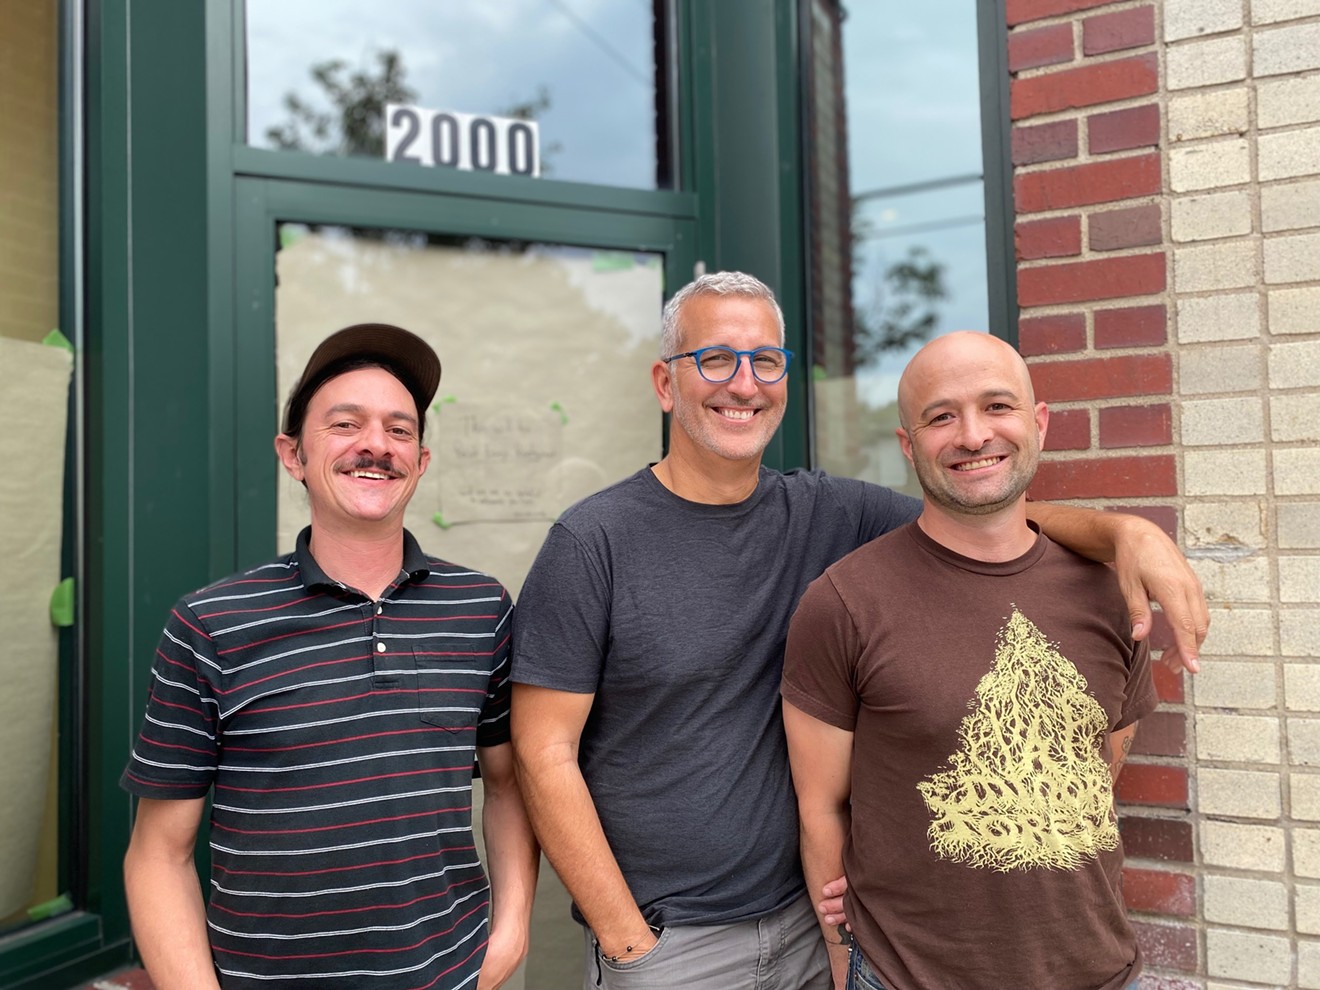 Point Easy owners Dennis Phelps, Andy Bruch and Dan Phelps intend to open the new restaurant by the end of the year.